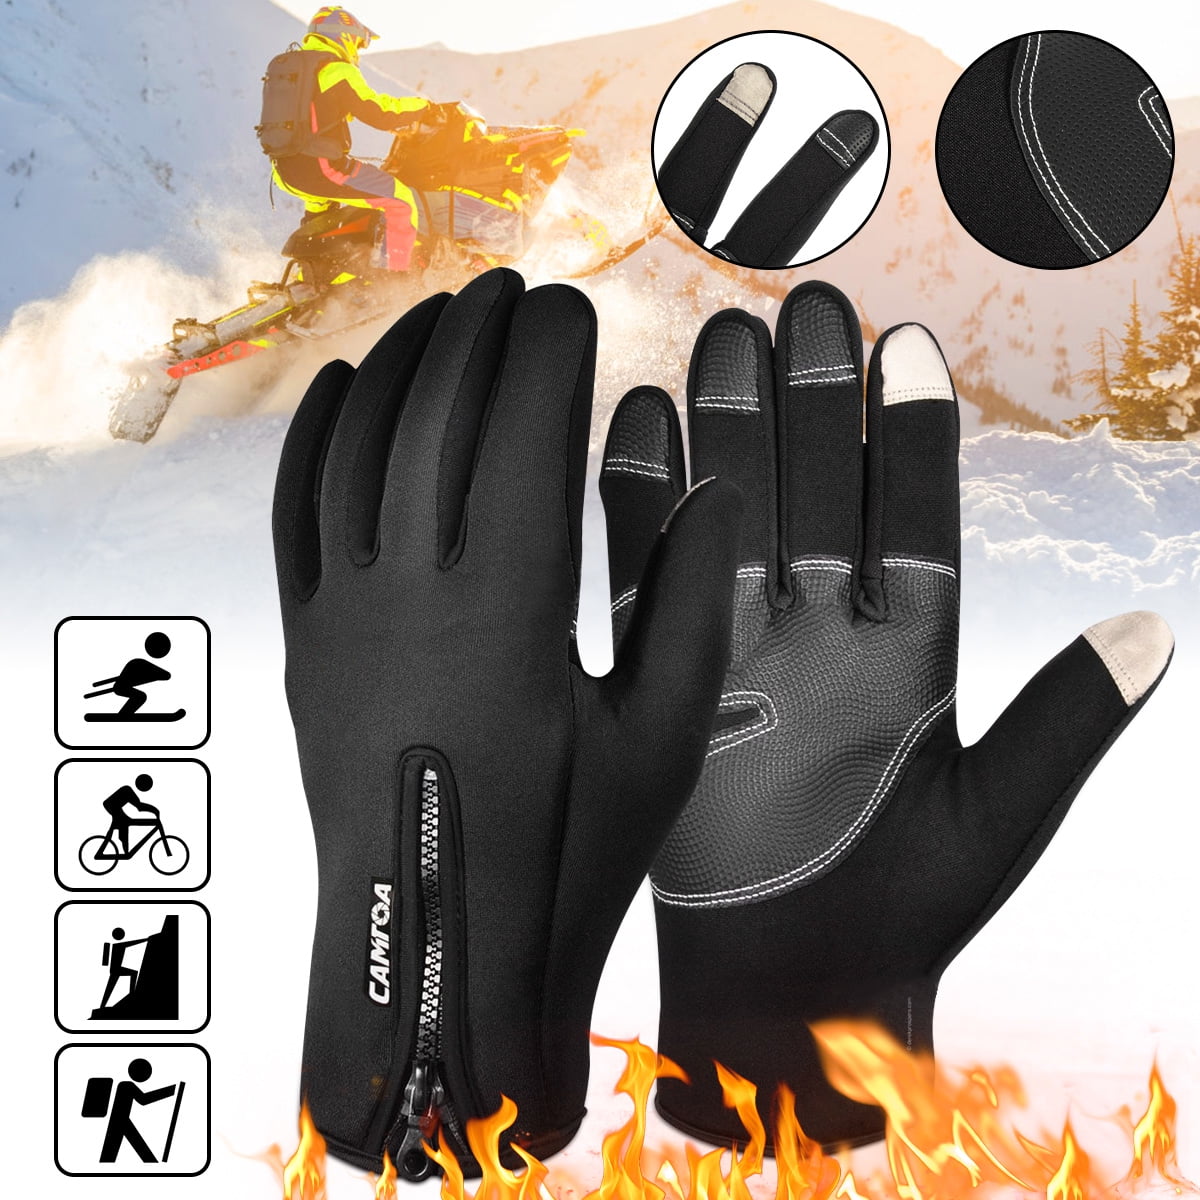 Waterproof Bike Cycling Thermal Warm Anti Skid Full Finger Touch Screen Gloves 